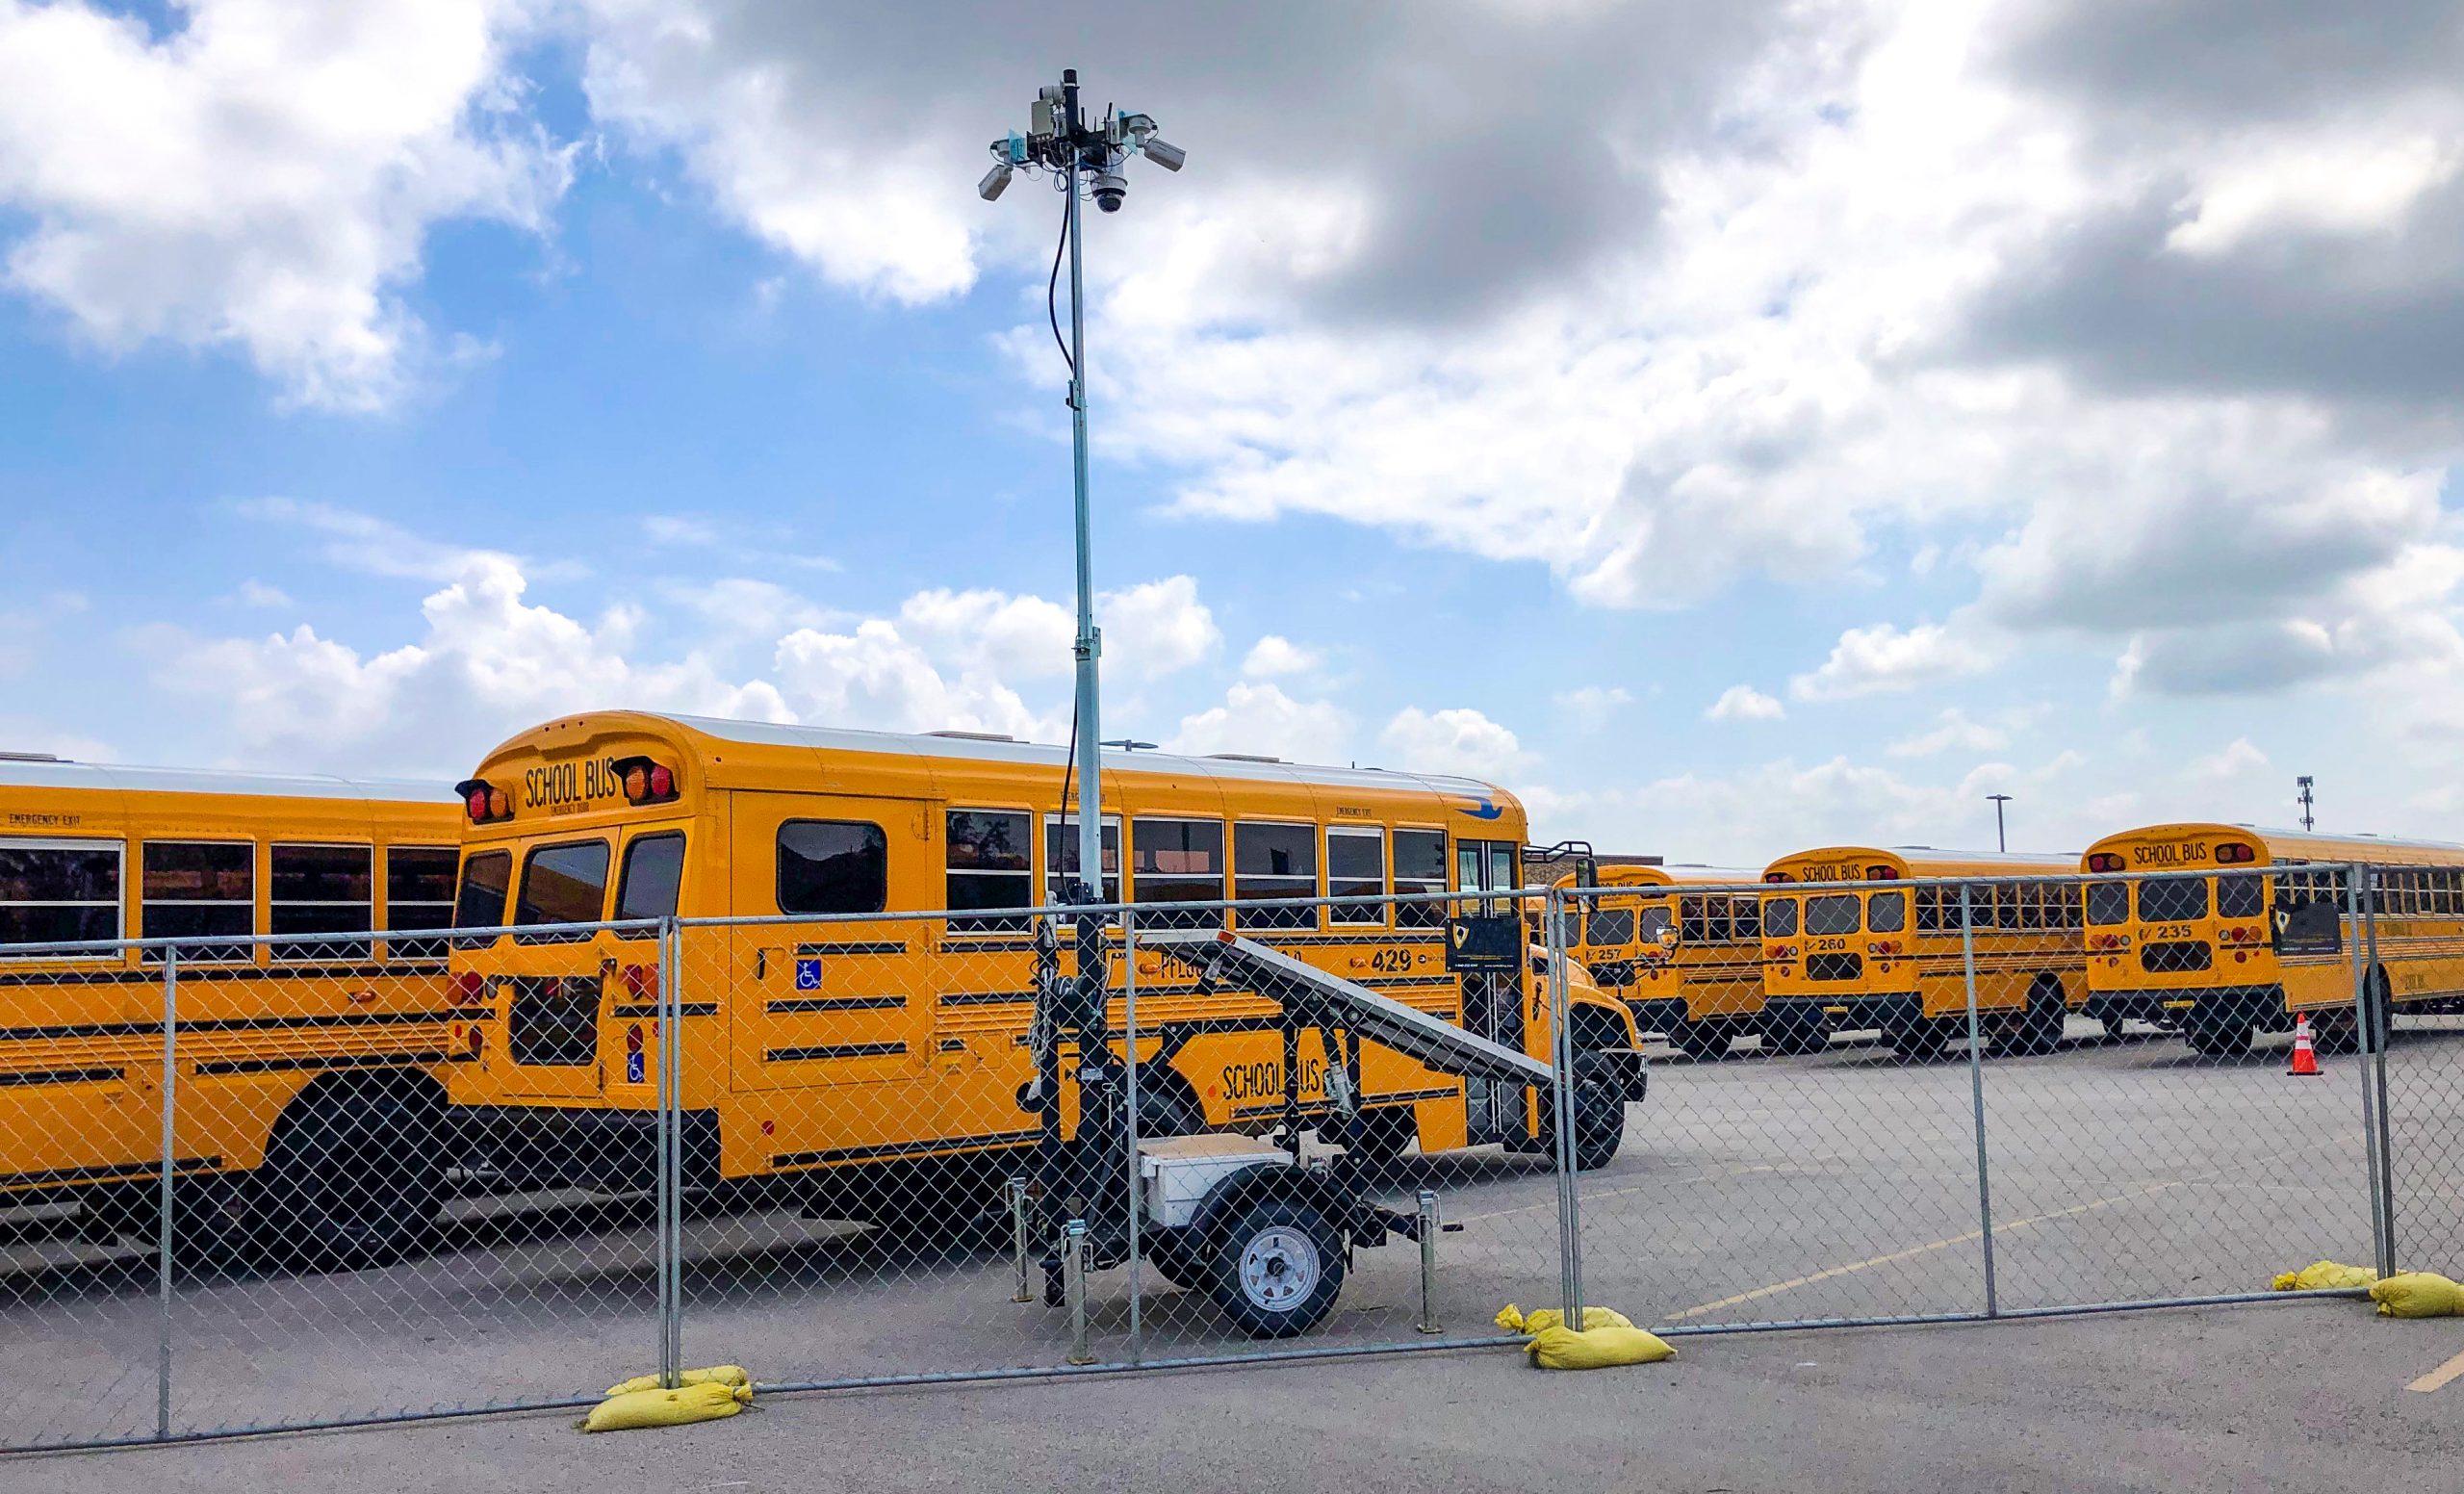 solar powered security camera trailer in school bus parking lot